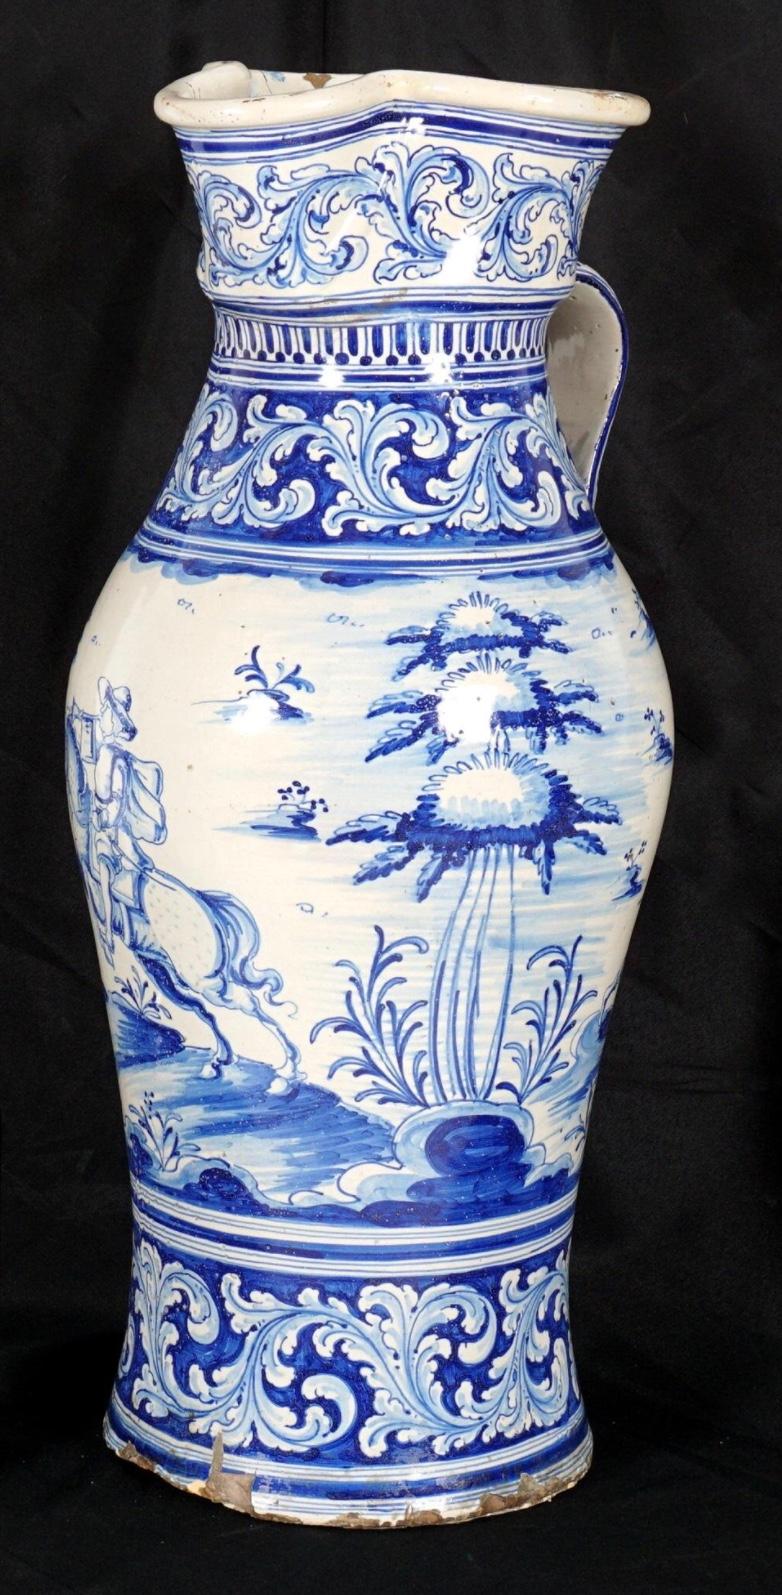 Monumental 18th/19th Century French Blue and White Faience Pitcher. Large blue and white faience decorated water pitcher / vessel, foliate scroll bands and hunting genre scenes, shaped rim, applied handle. Bright vivid colors throughout.